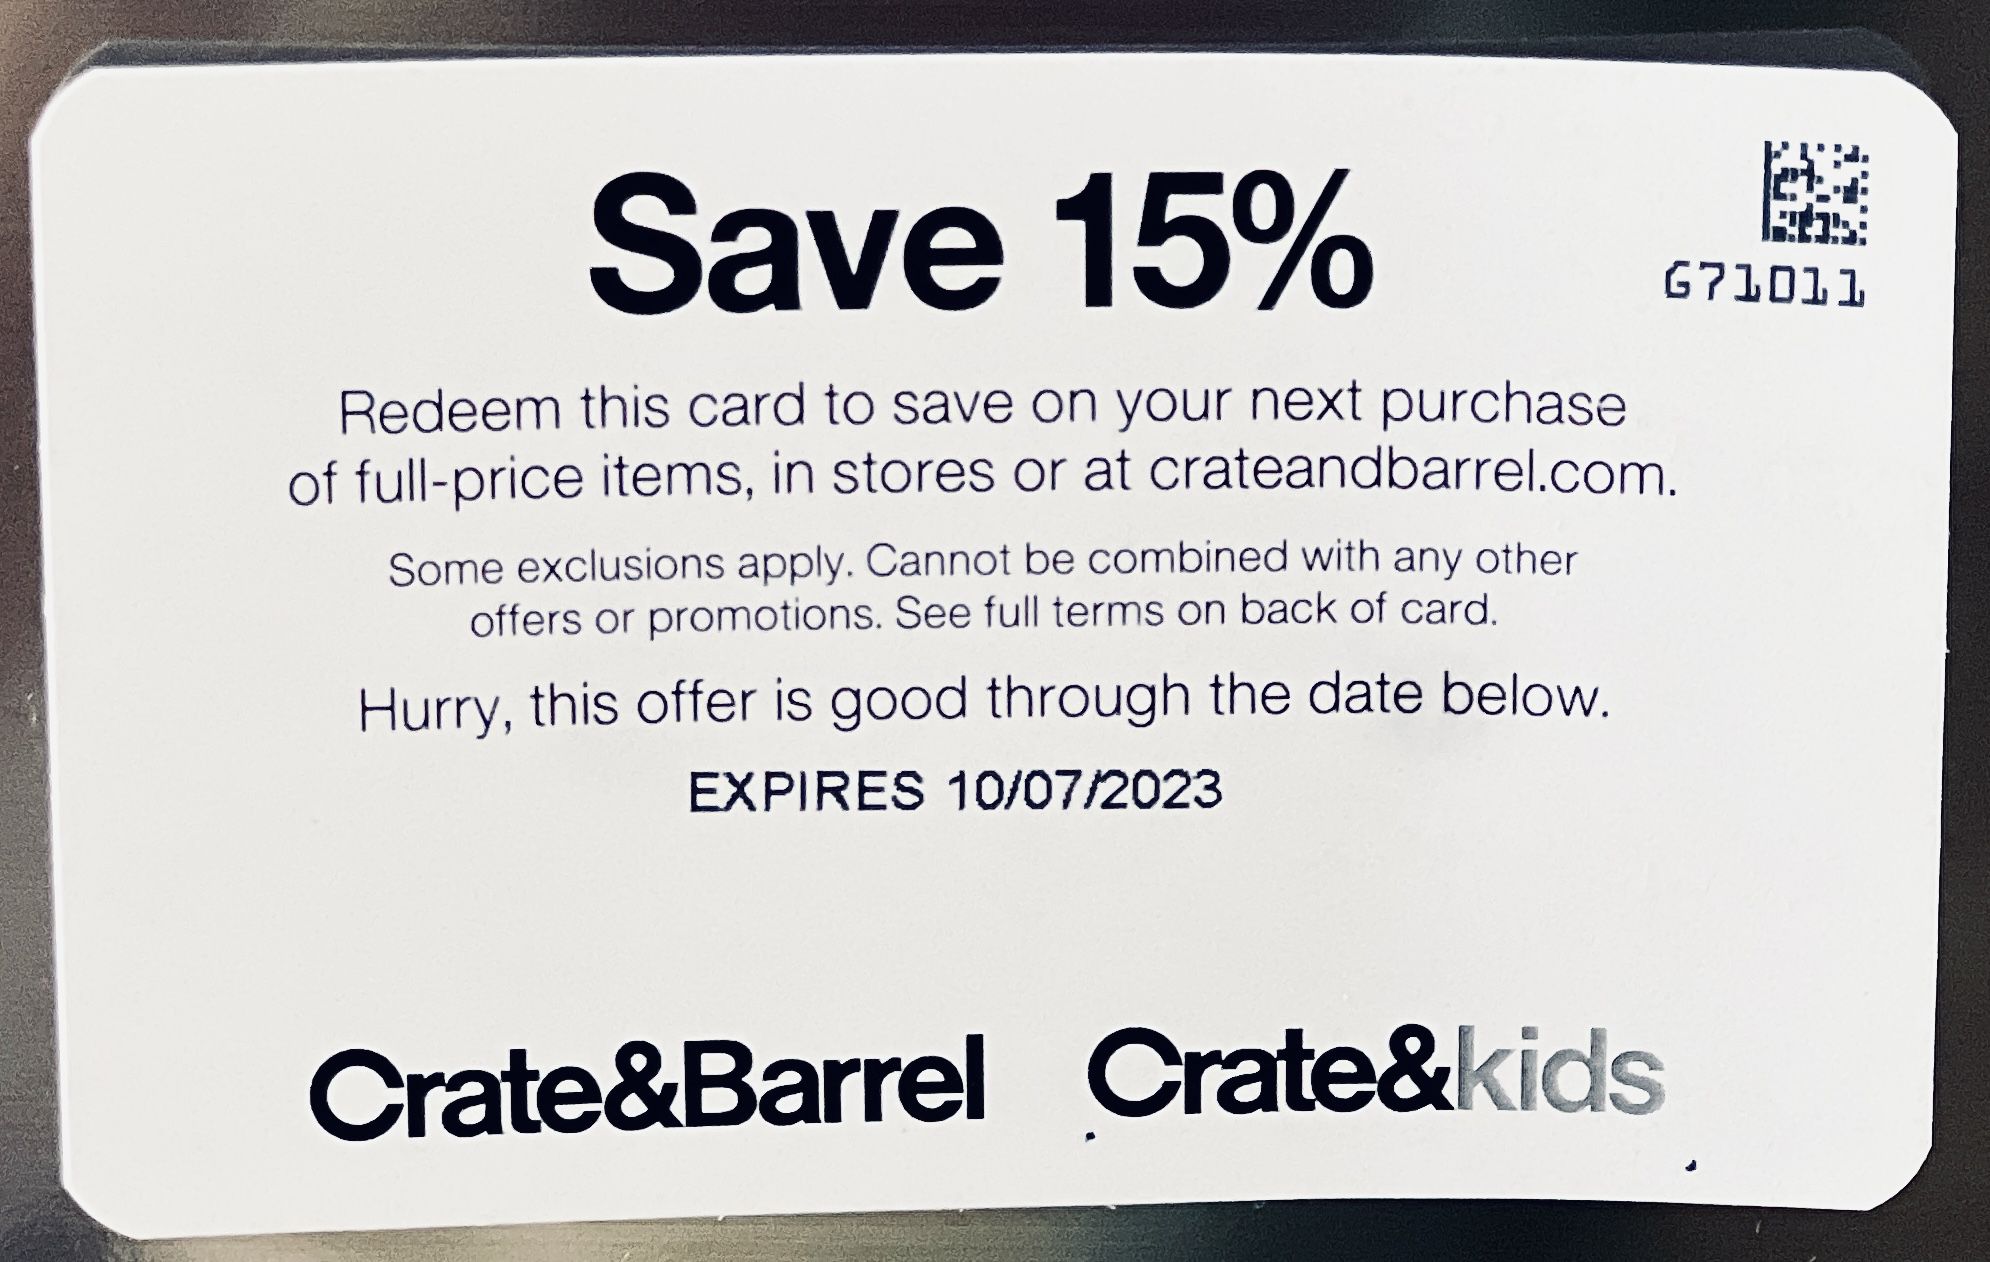 Crate & Barrel Coupon Promo Code 15% Off Full Priced Items (Exp 10/07/23)